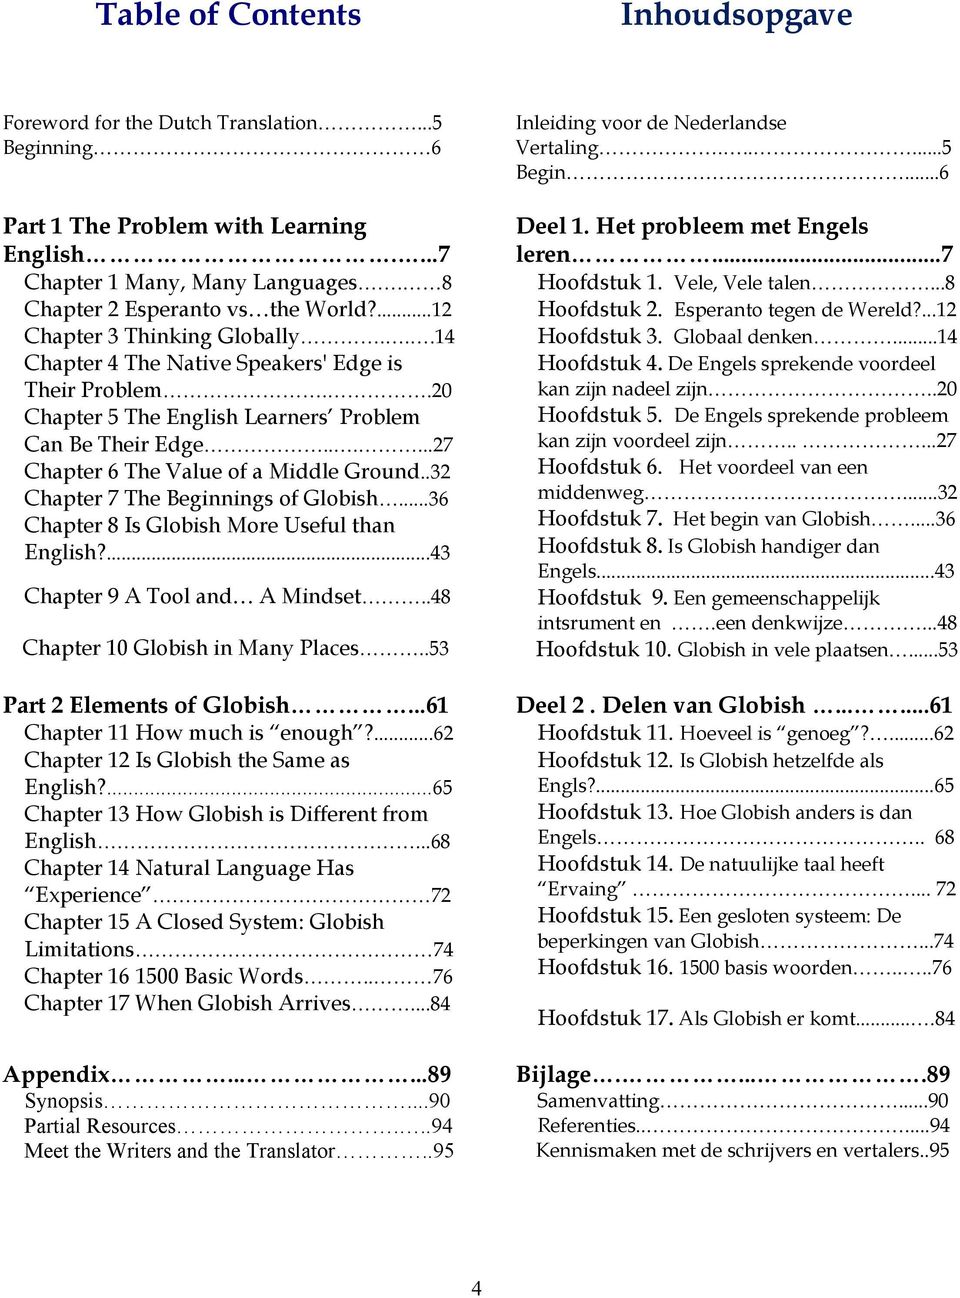 .32 Chapter 7 The Beginnings of Globish...36 Chapter 8 Is Globish More Useful than English?...43 Chapter 9 A Tool and A Mindset..48 Chapter 10 Globish in Many Places..53 Part 2 Elements of Globish.